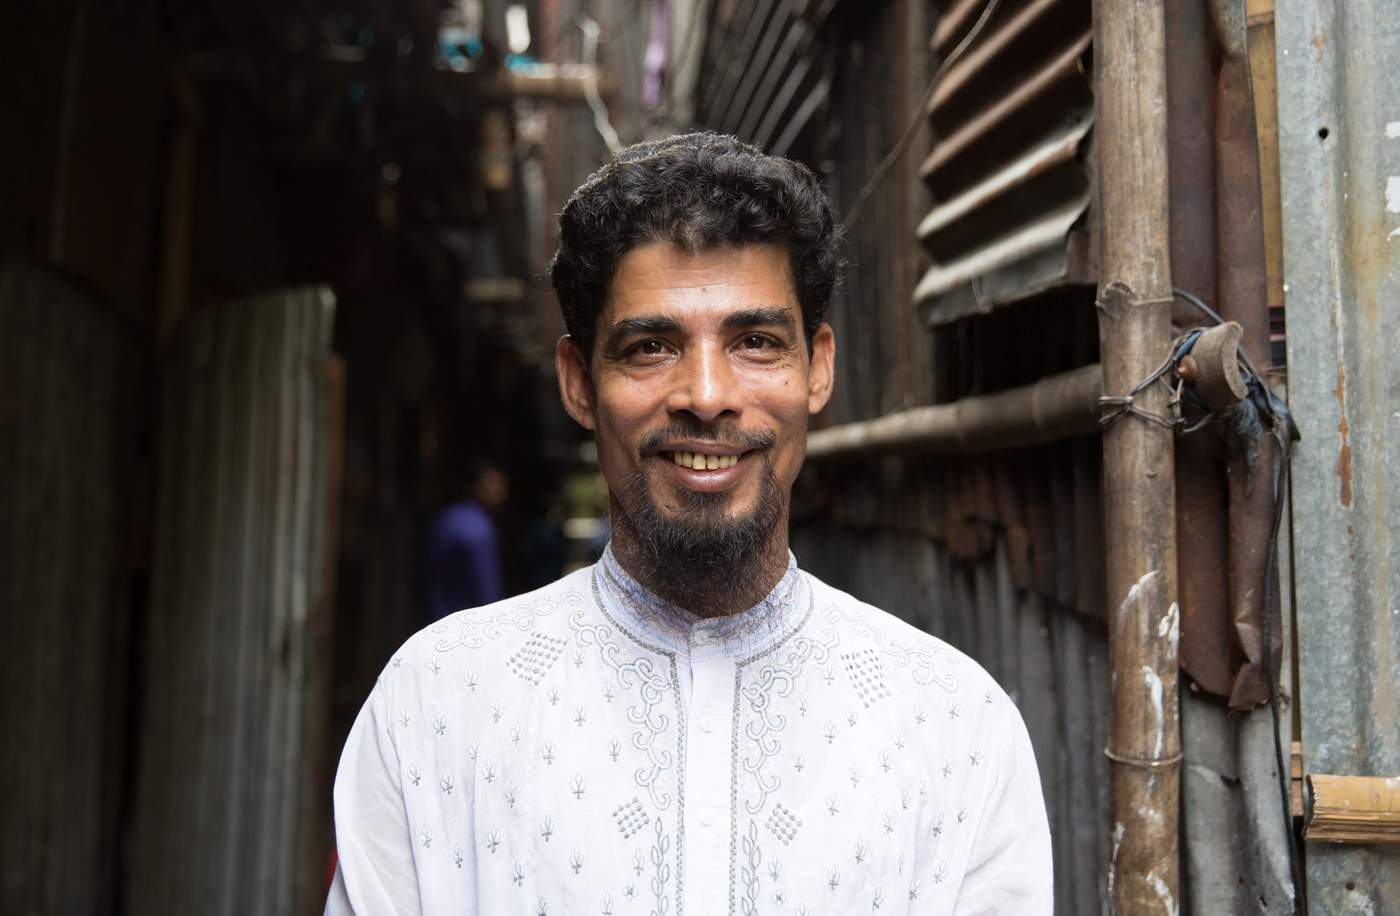 Faruq, one of the founders of the Bhola slum